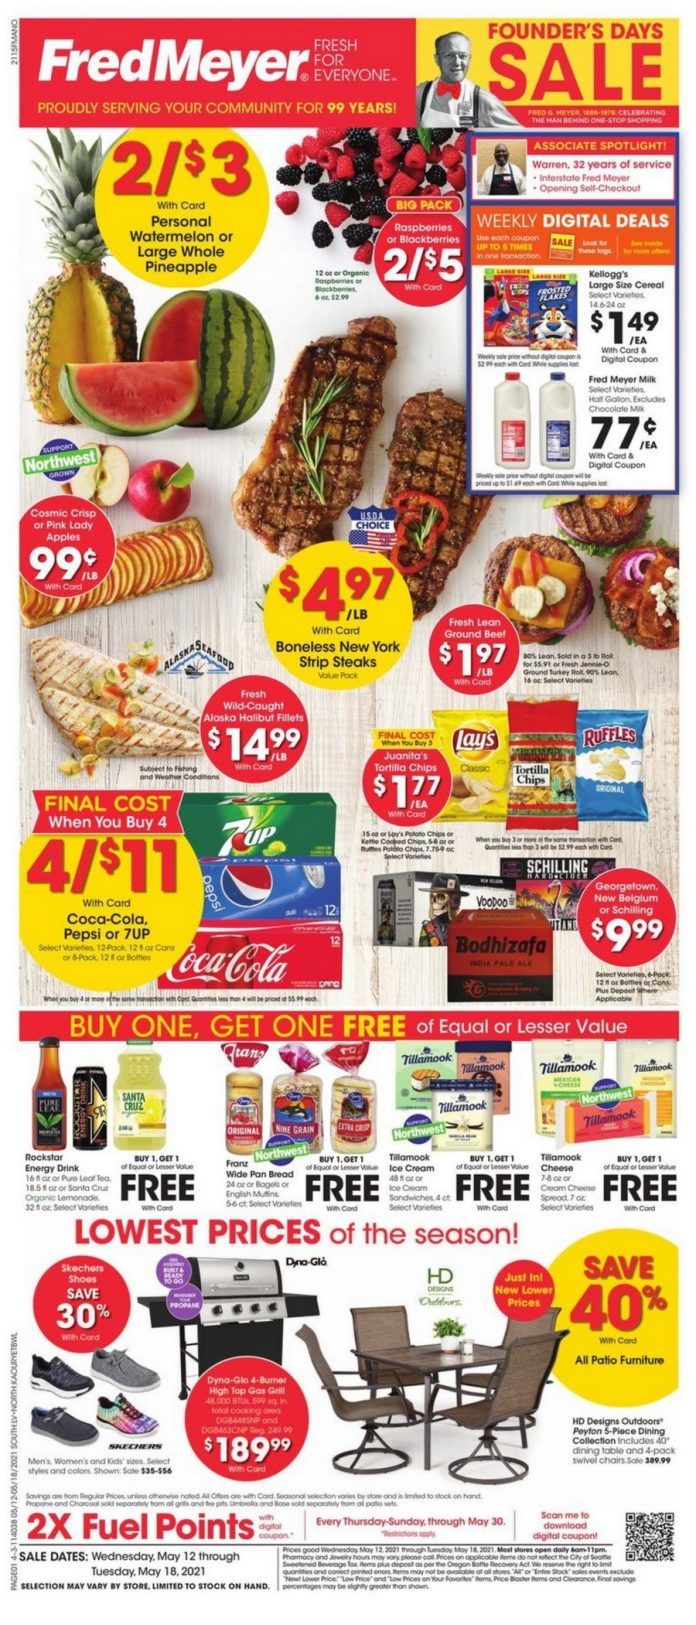 Fred Meyer Founder's Day Ad May 12 May 18, 2021 Part 16